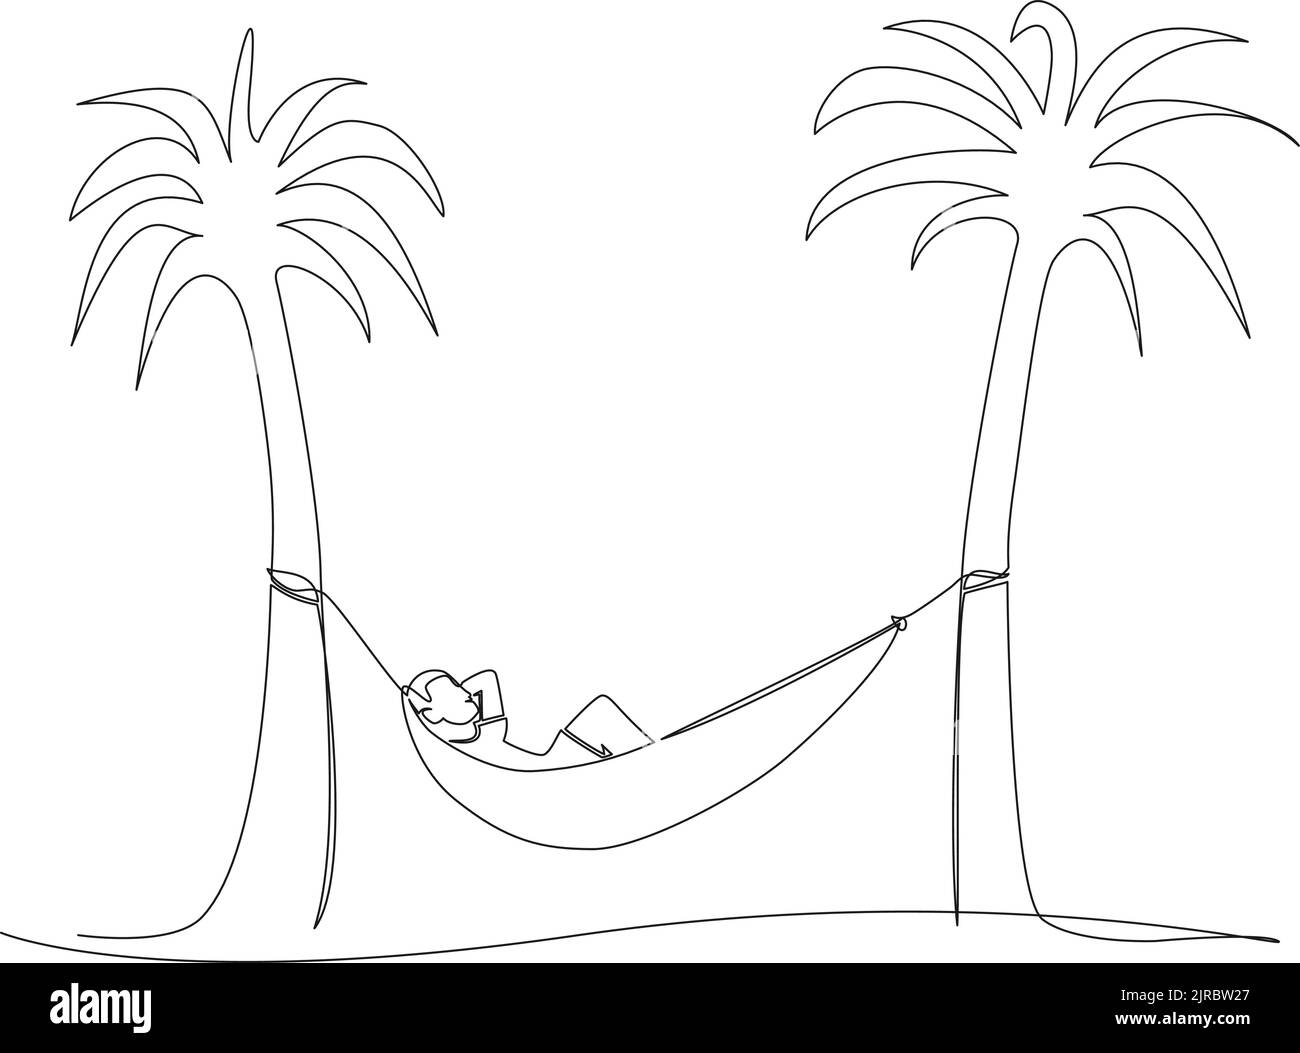 continuous single line drawing of person relaxing in hammock between palm trees, line art vector illustration Stock Vector